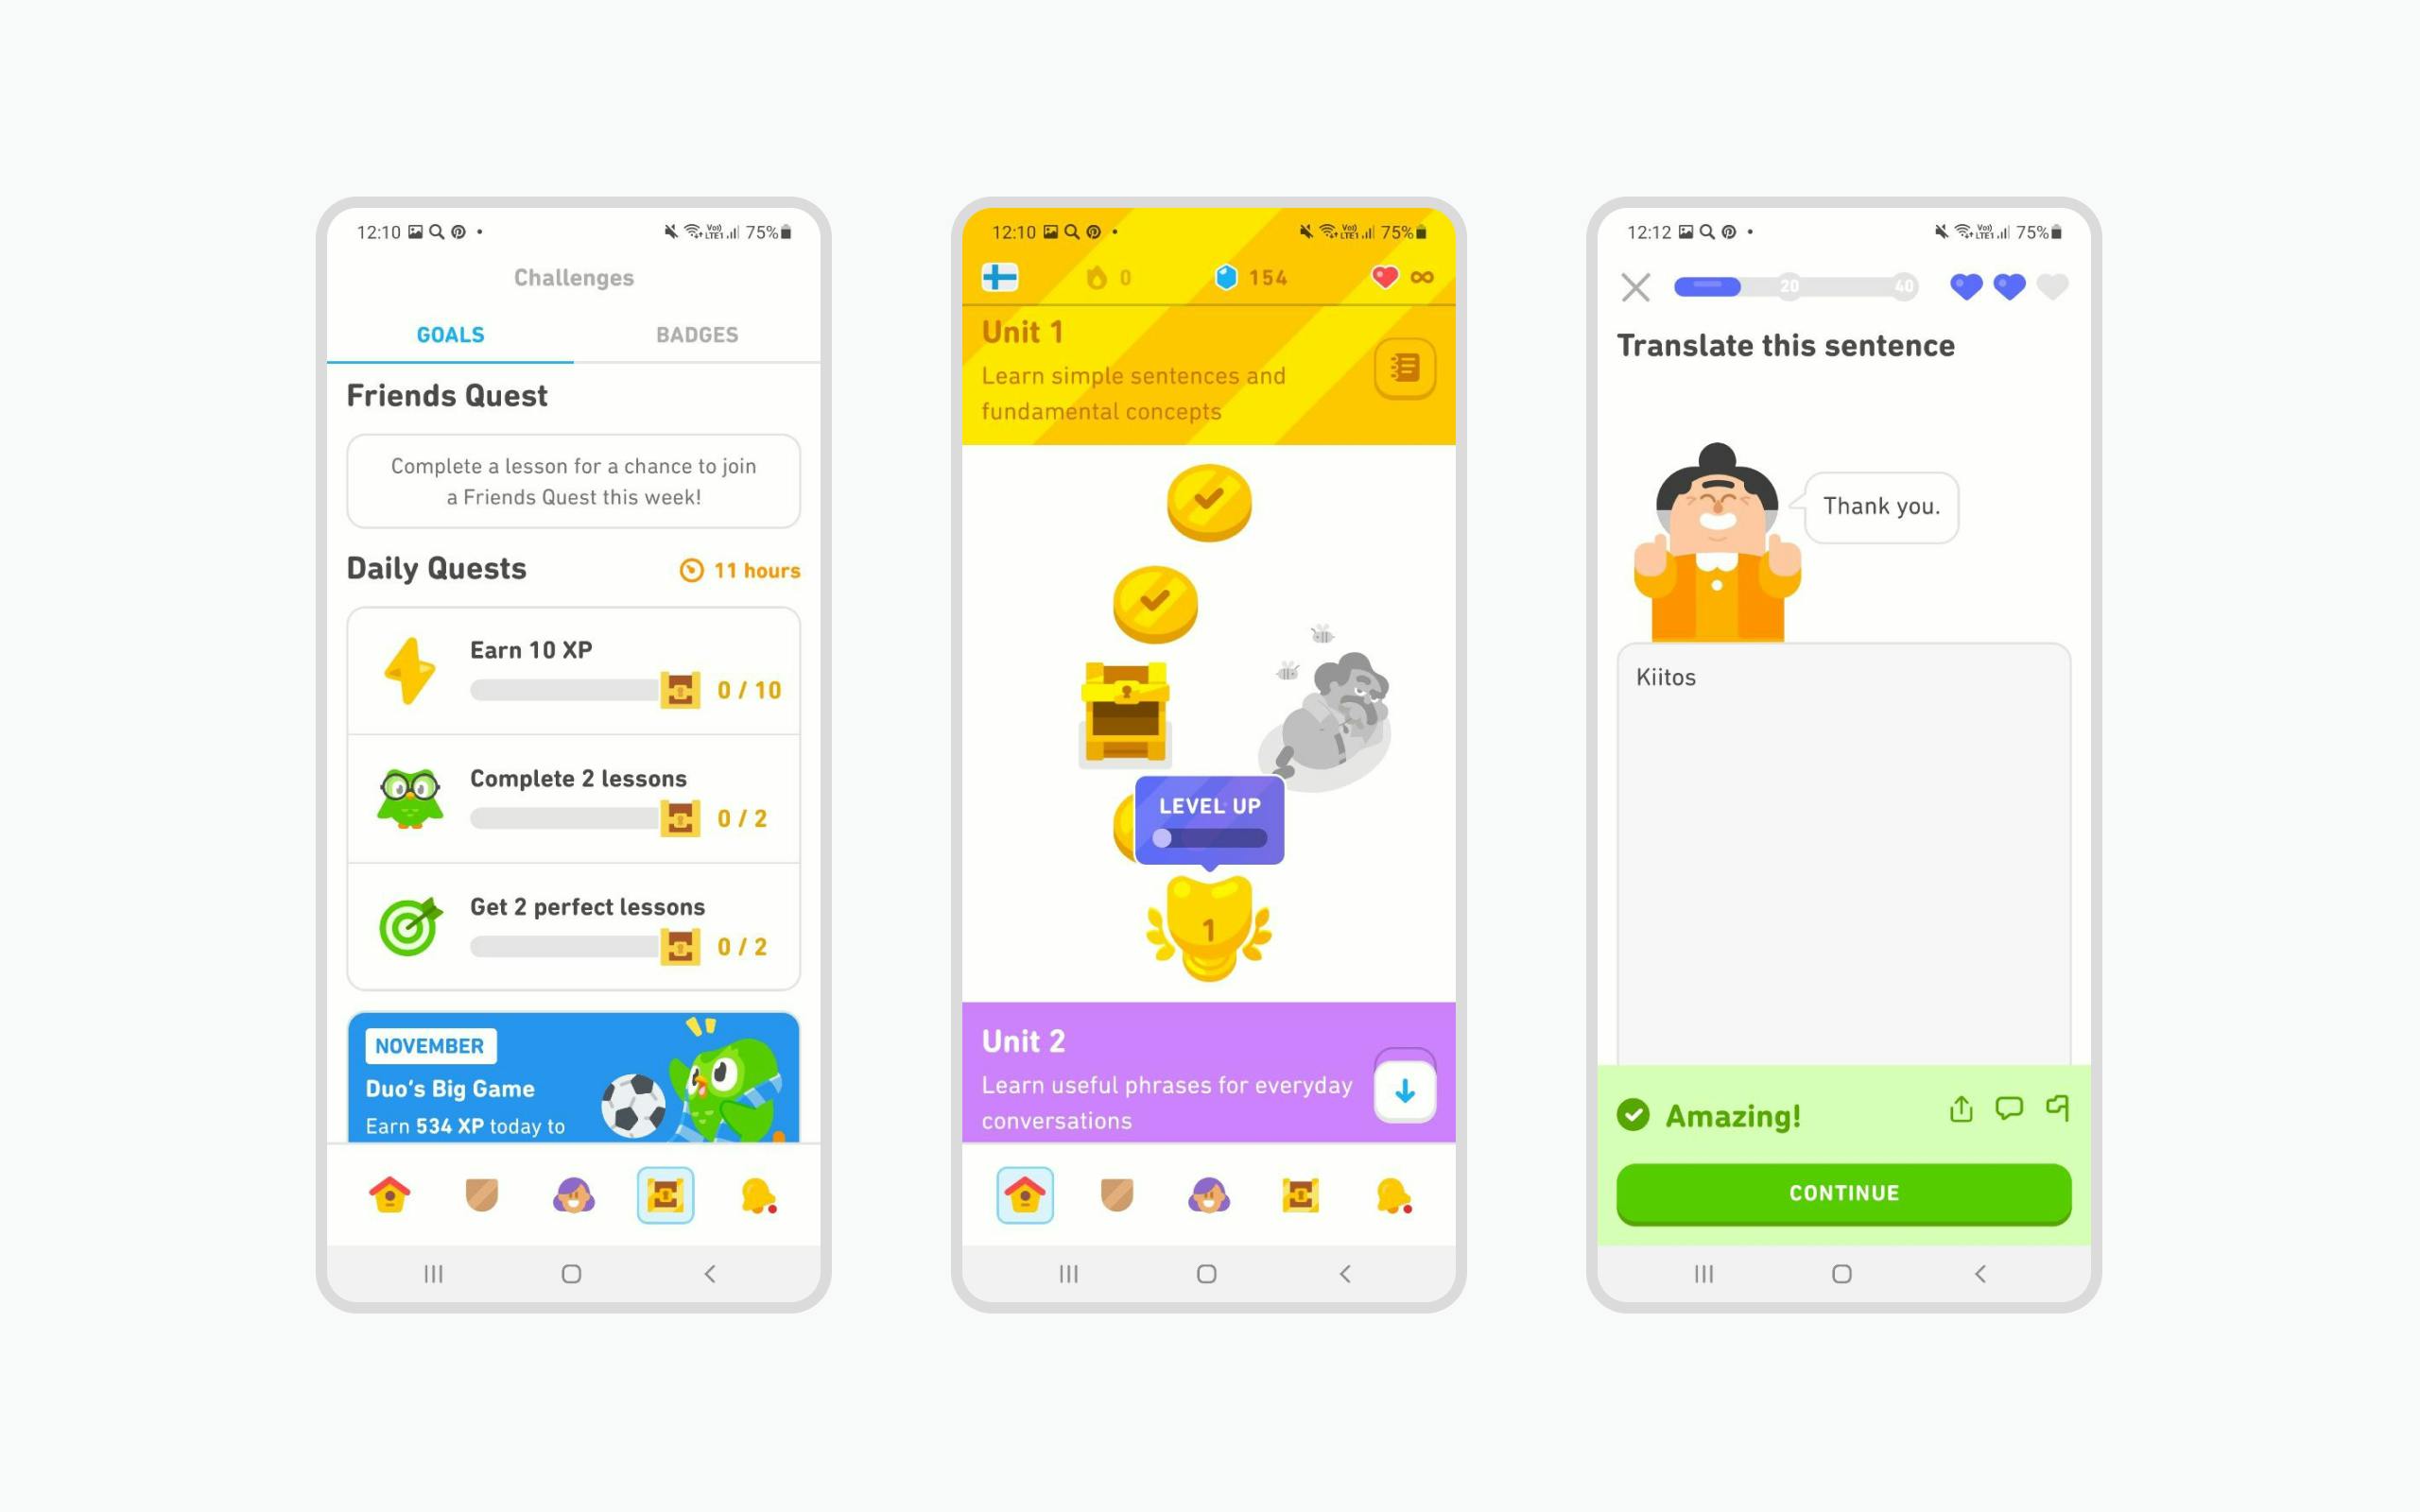 Duolingo app interfaces: a Goals page with Friends Quest and Daily Quests sections, page with units, translation task page.